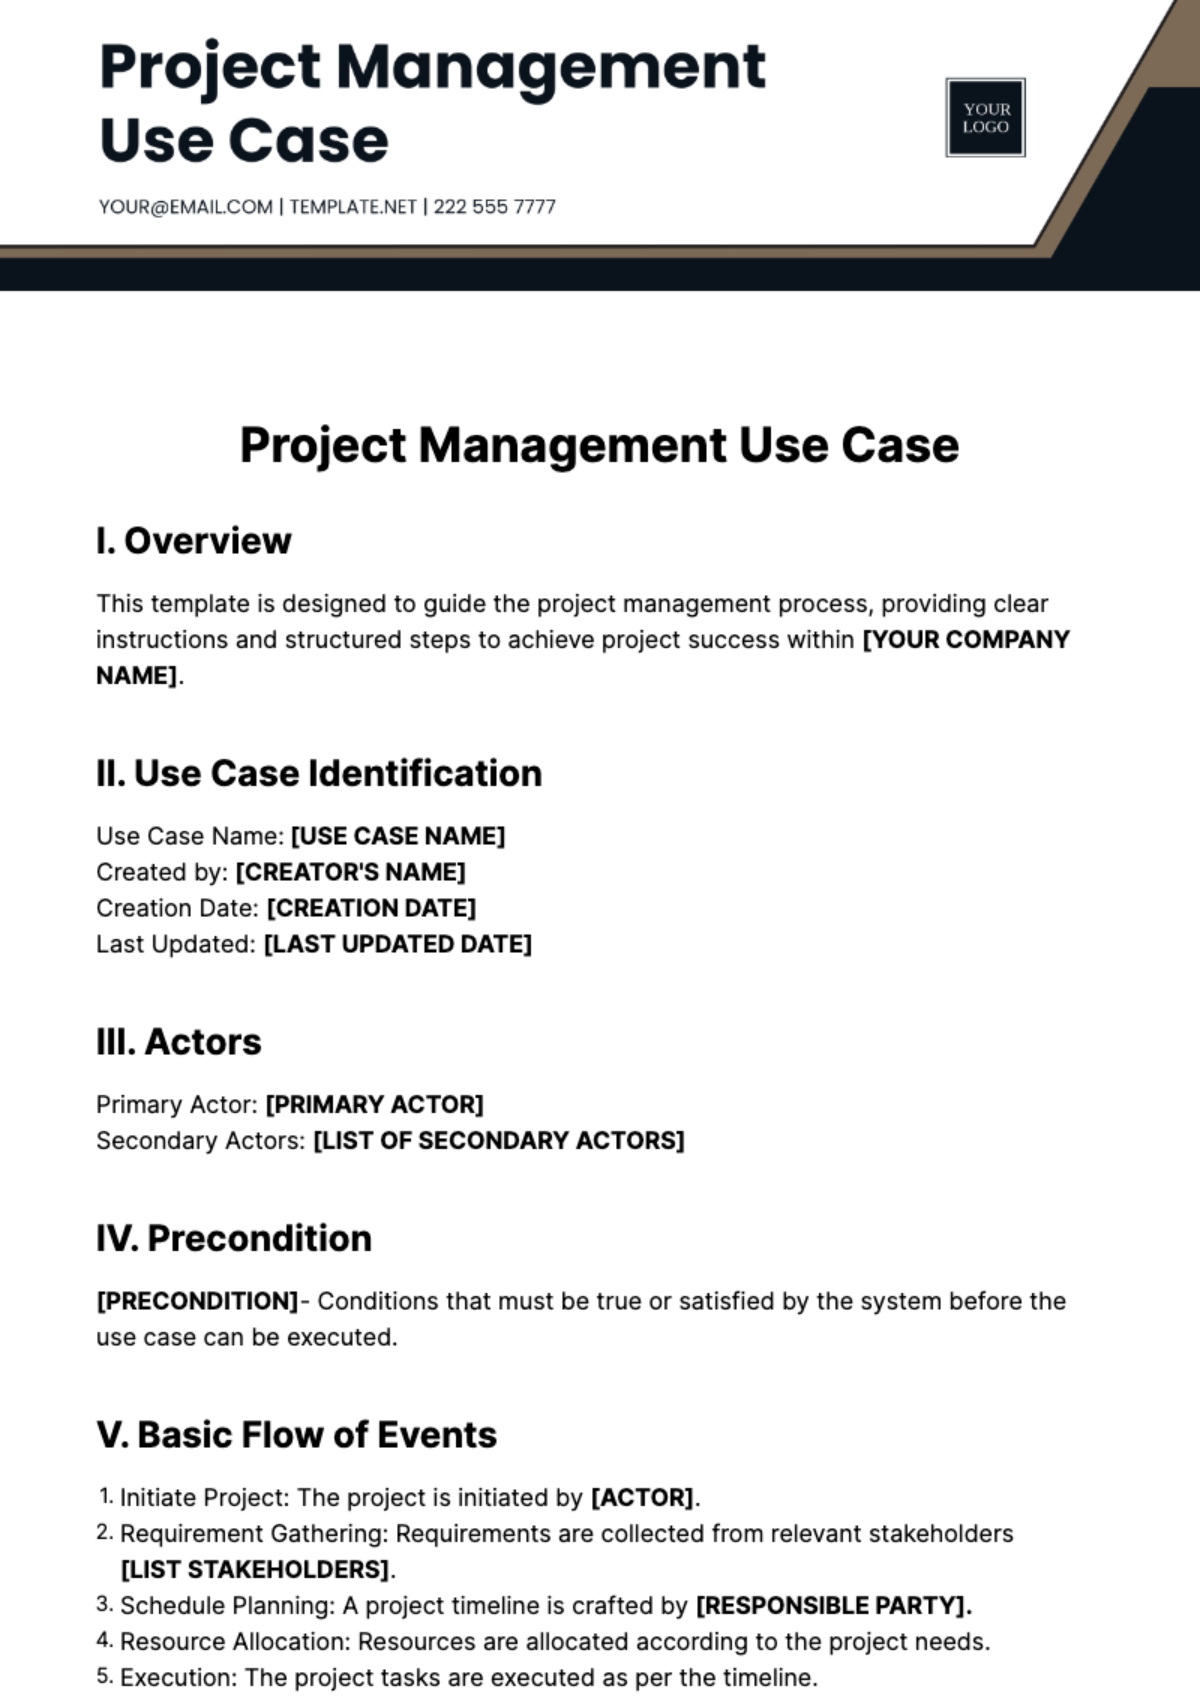 Free Project Management Use Case Template